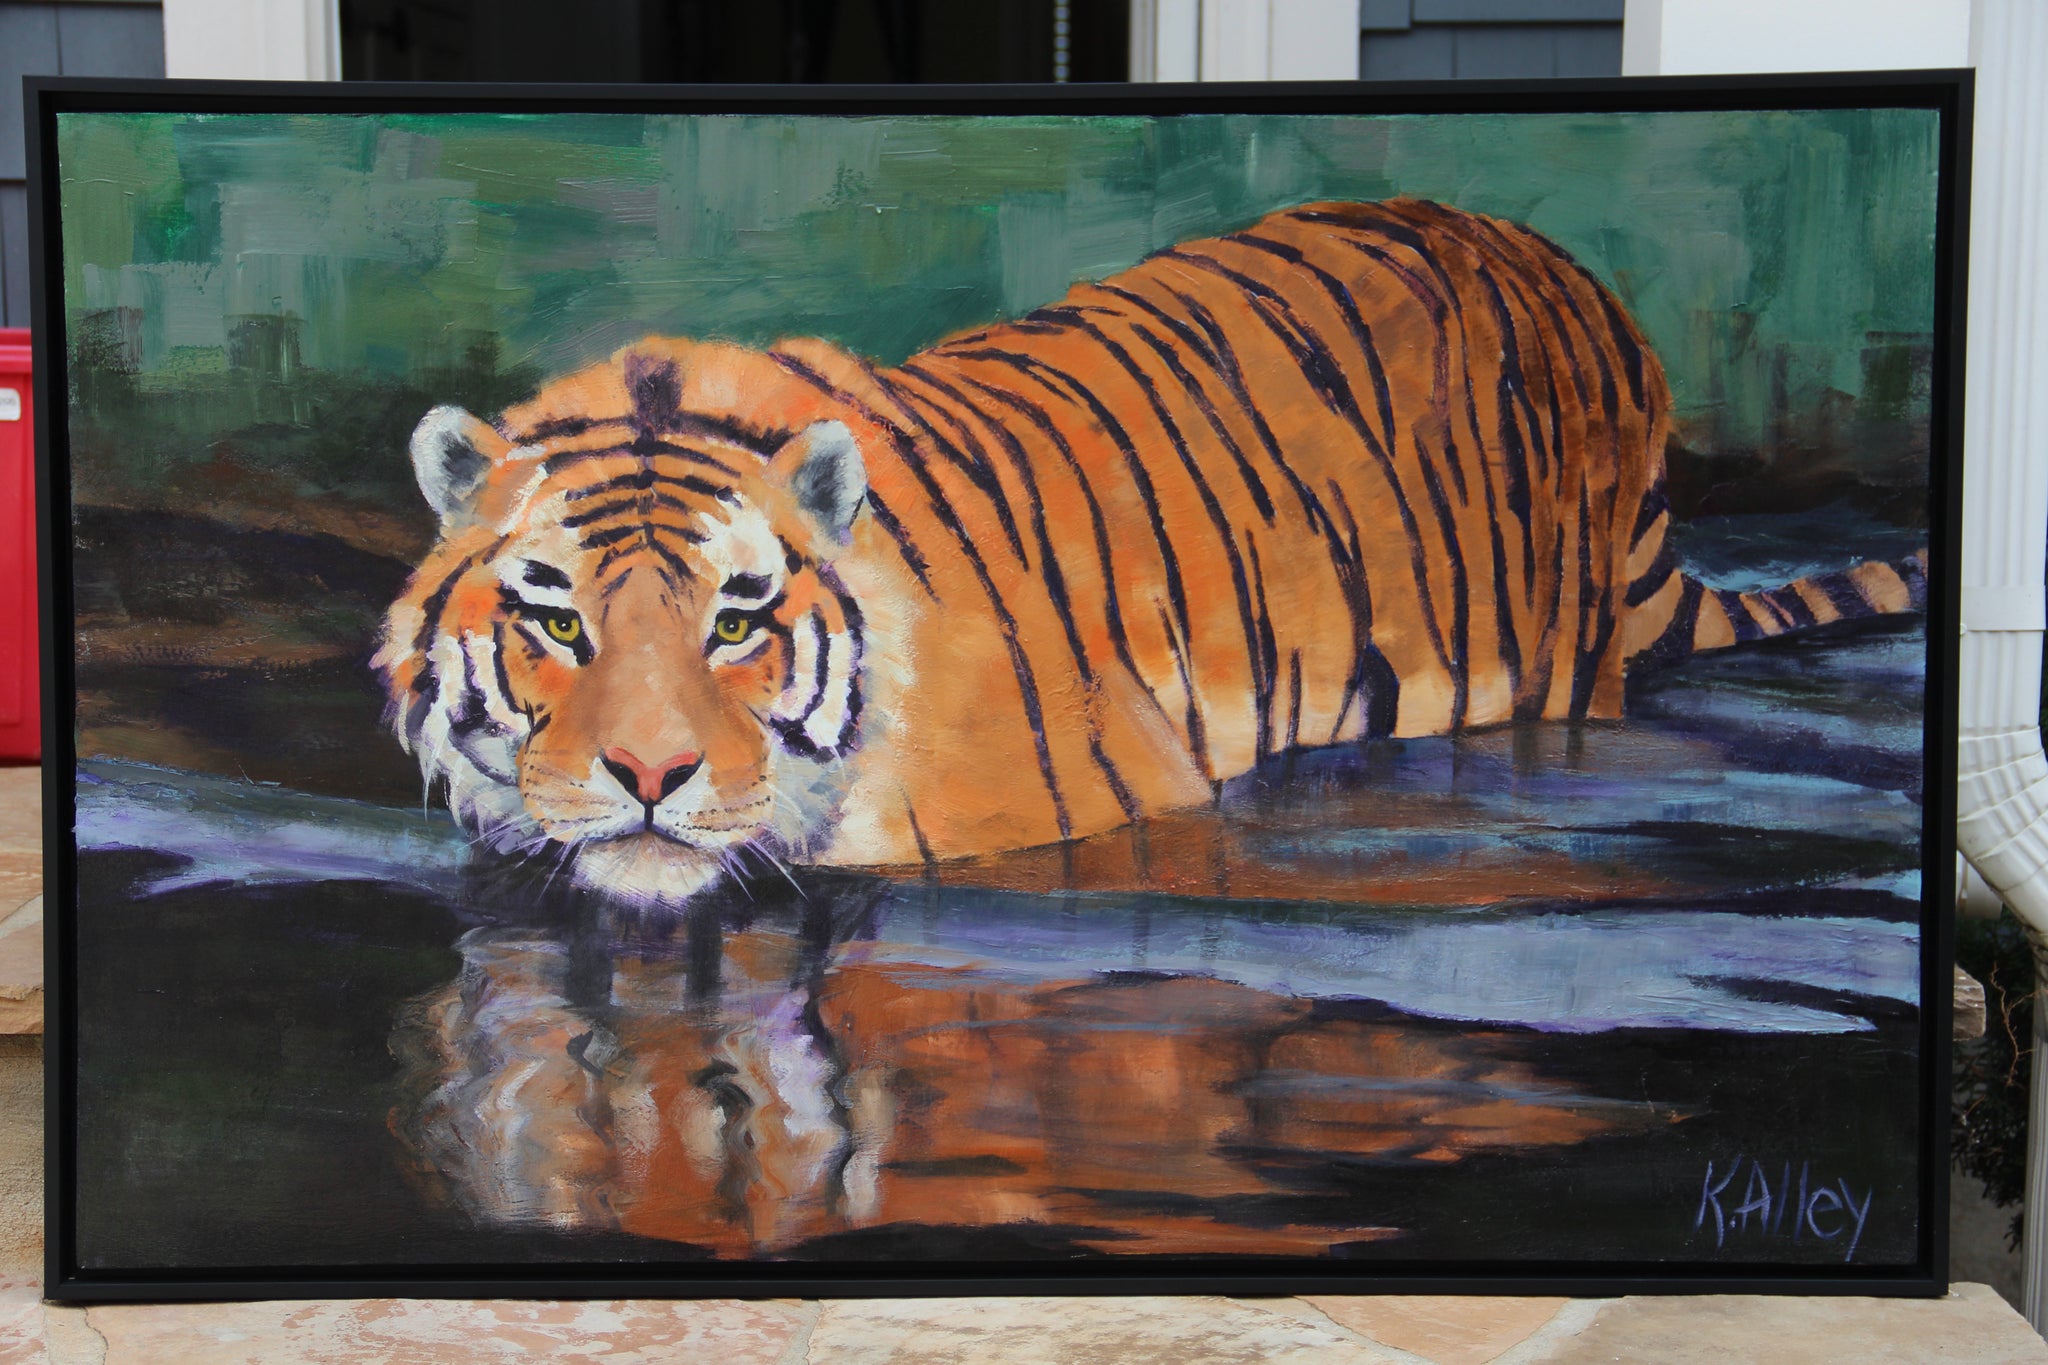 On The Prowl Canvas Print (6 sizes)